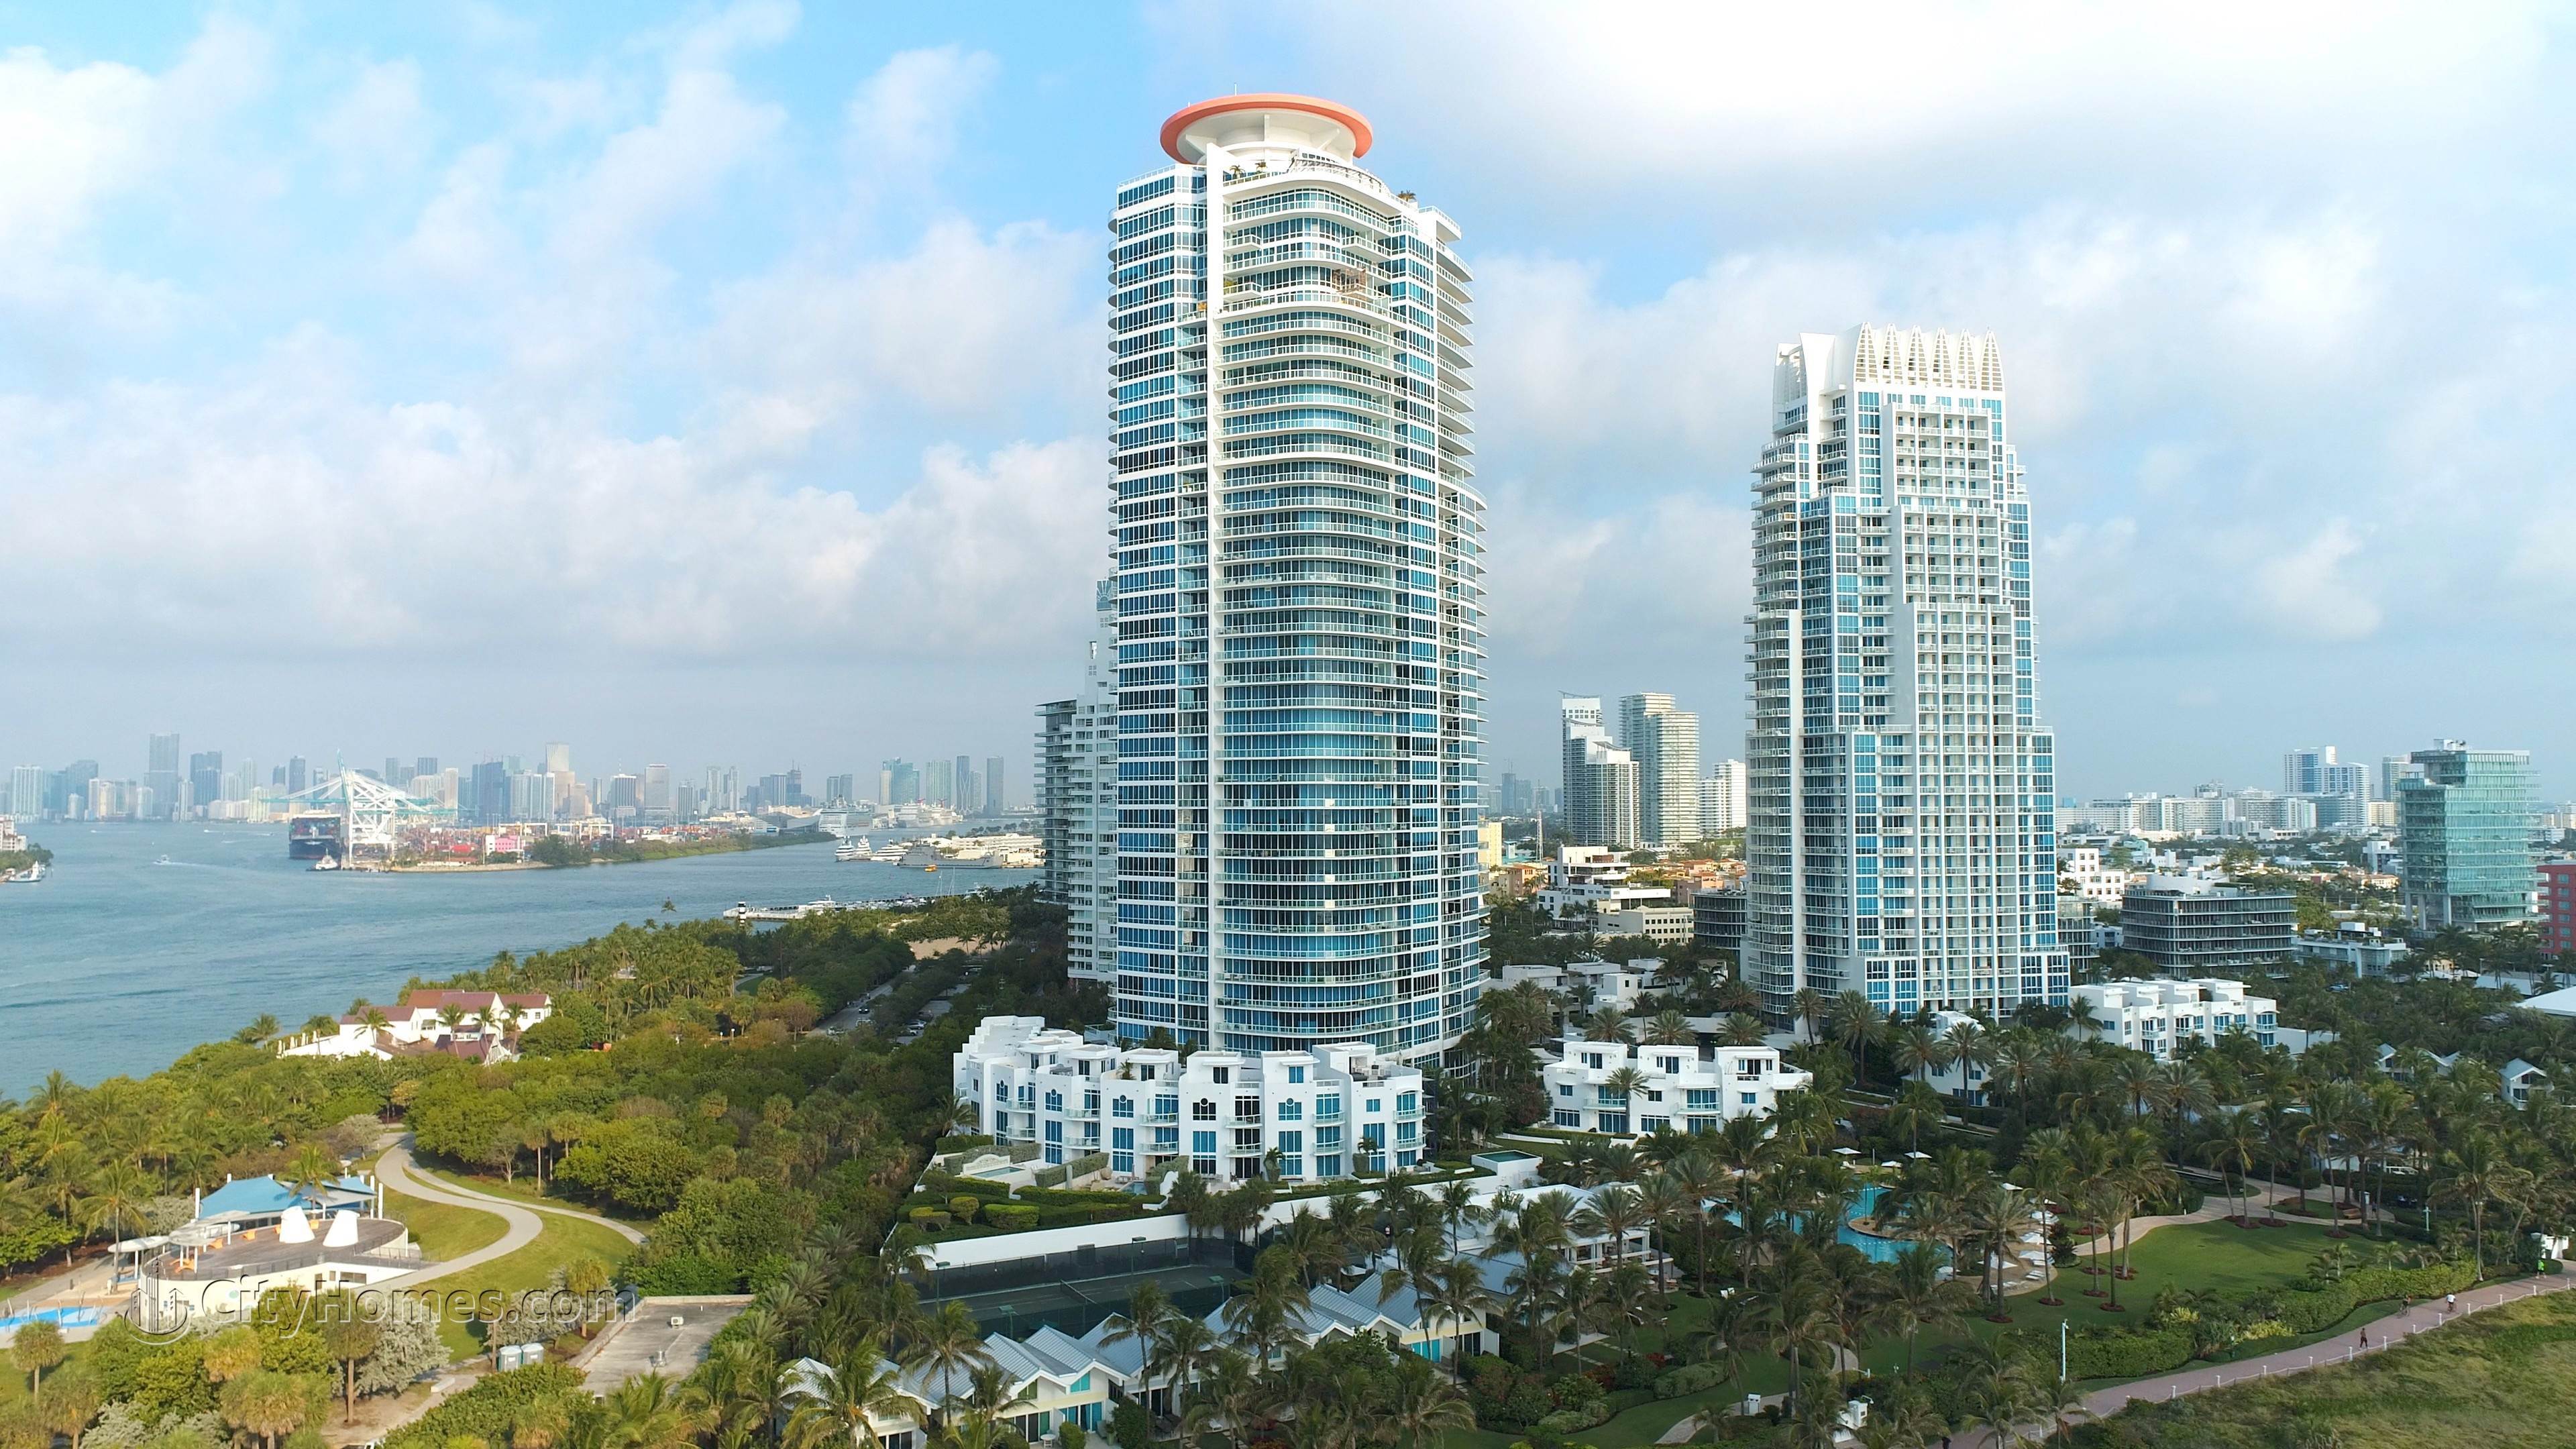 3. CONTINUUM SOUTH TOWER building at 100 S Pointe Dr., Miami Beach, FL 33139